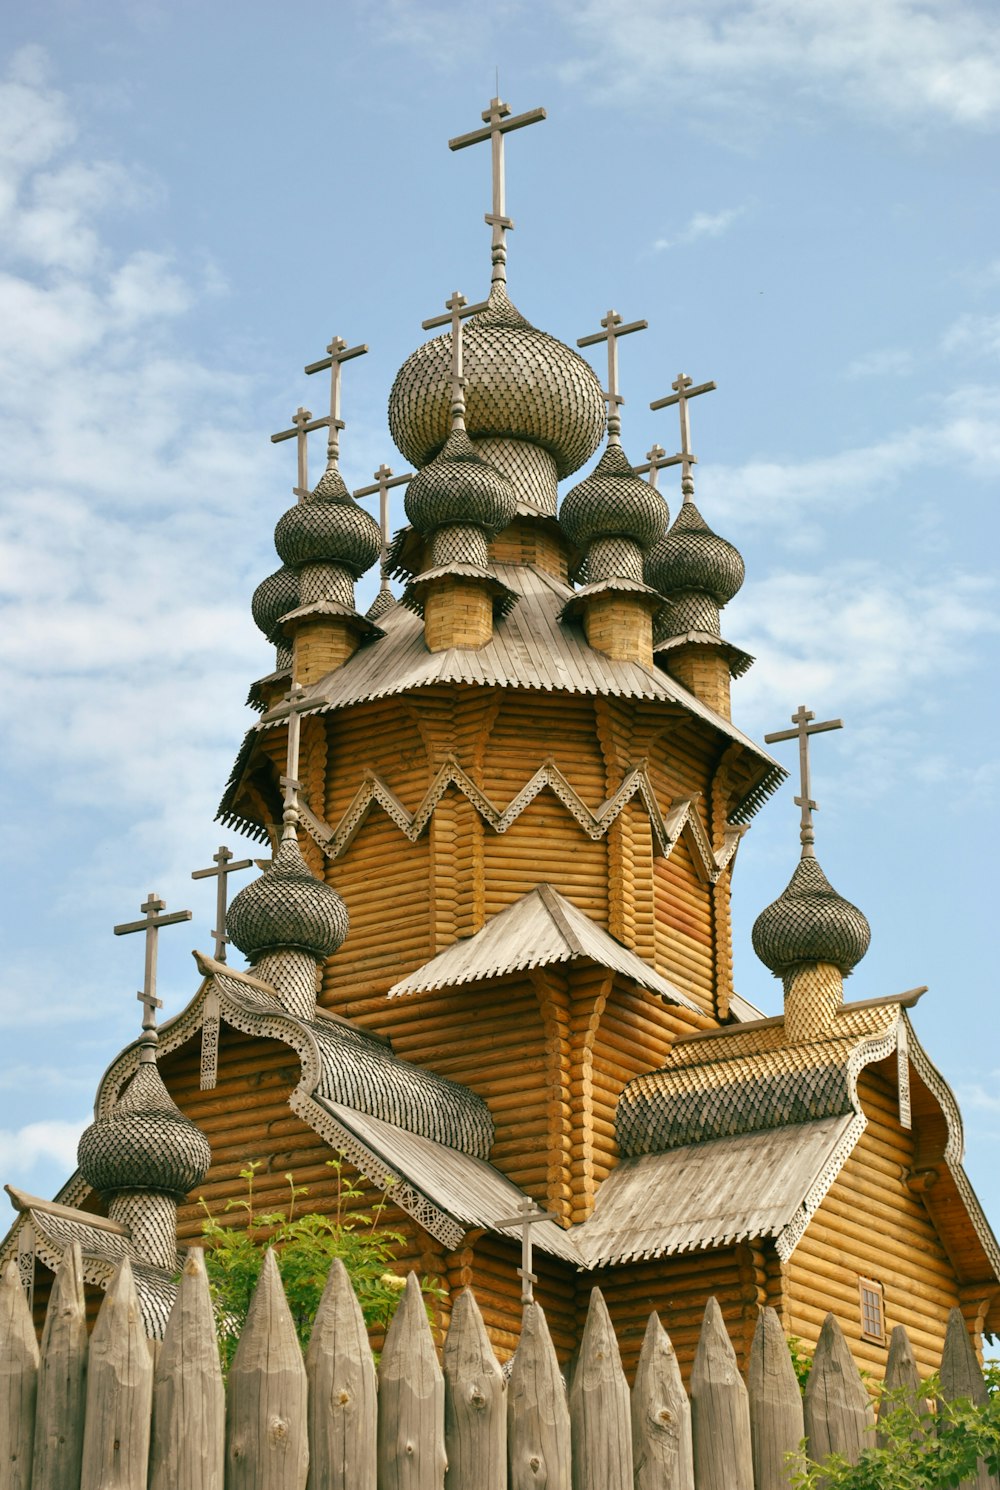 a wooden church with crosses on the roof